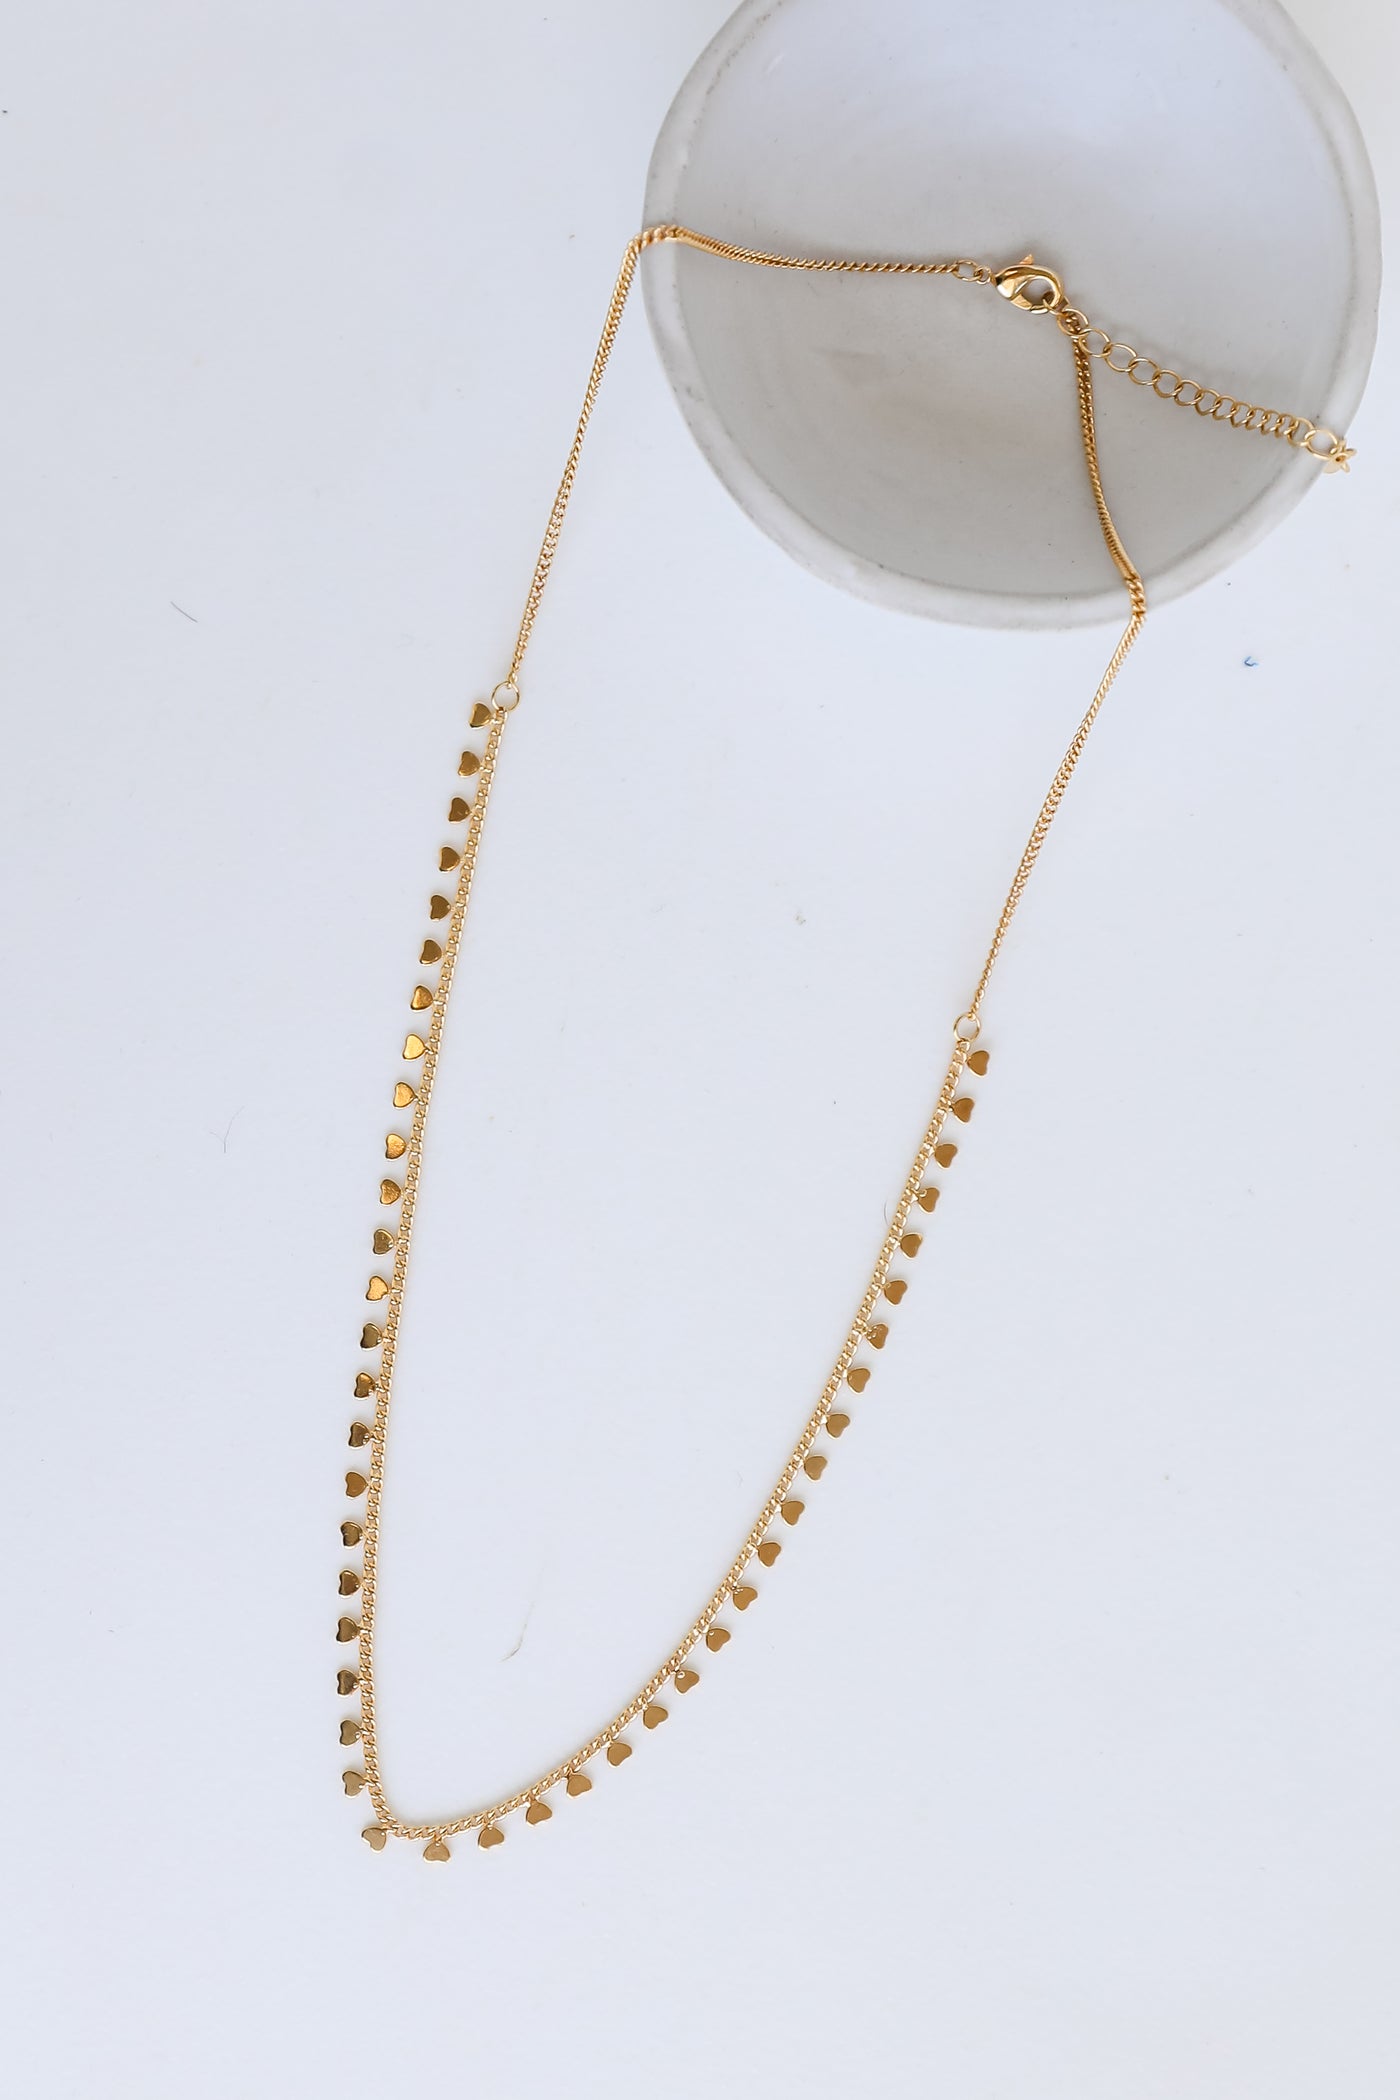 Gold Heart Charm Necklace flat lay